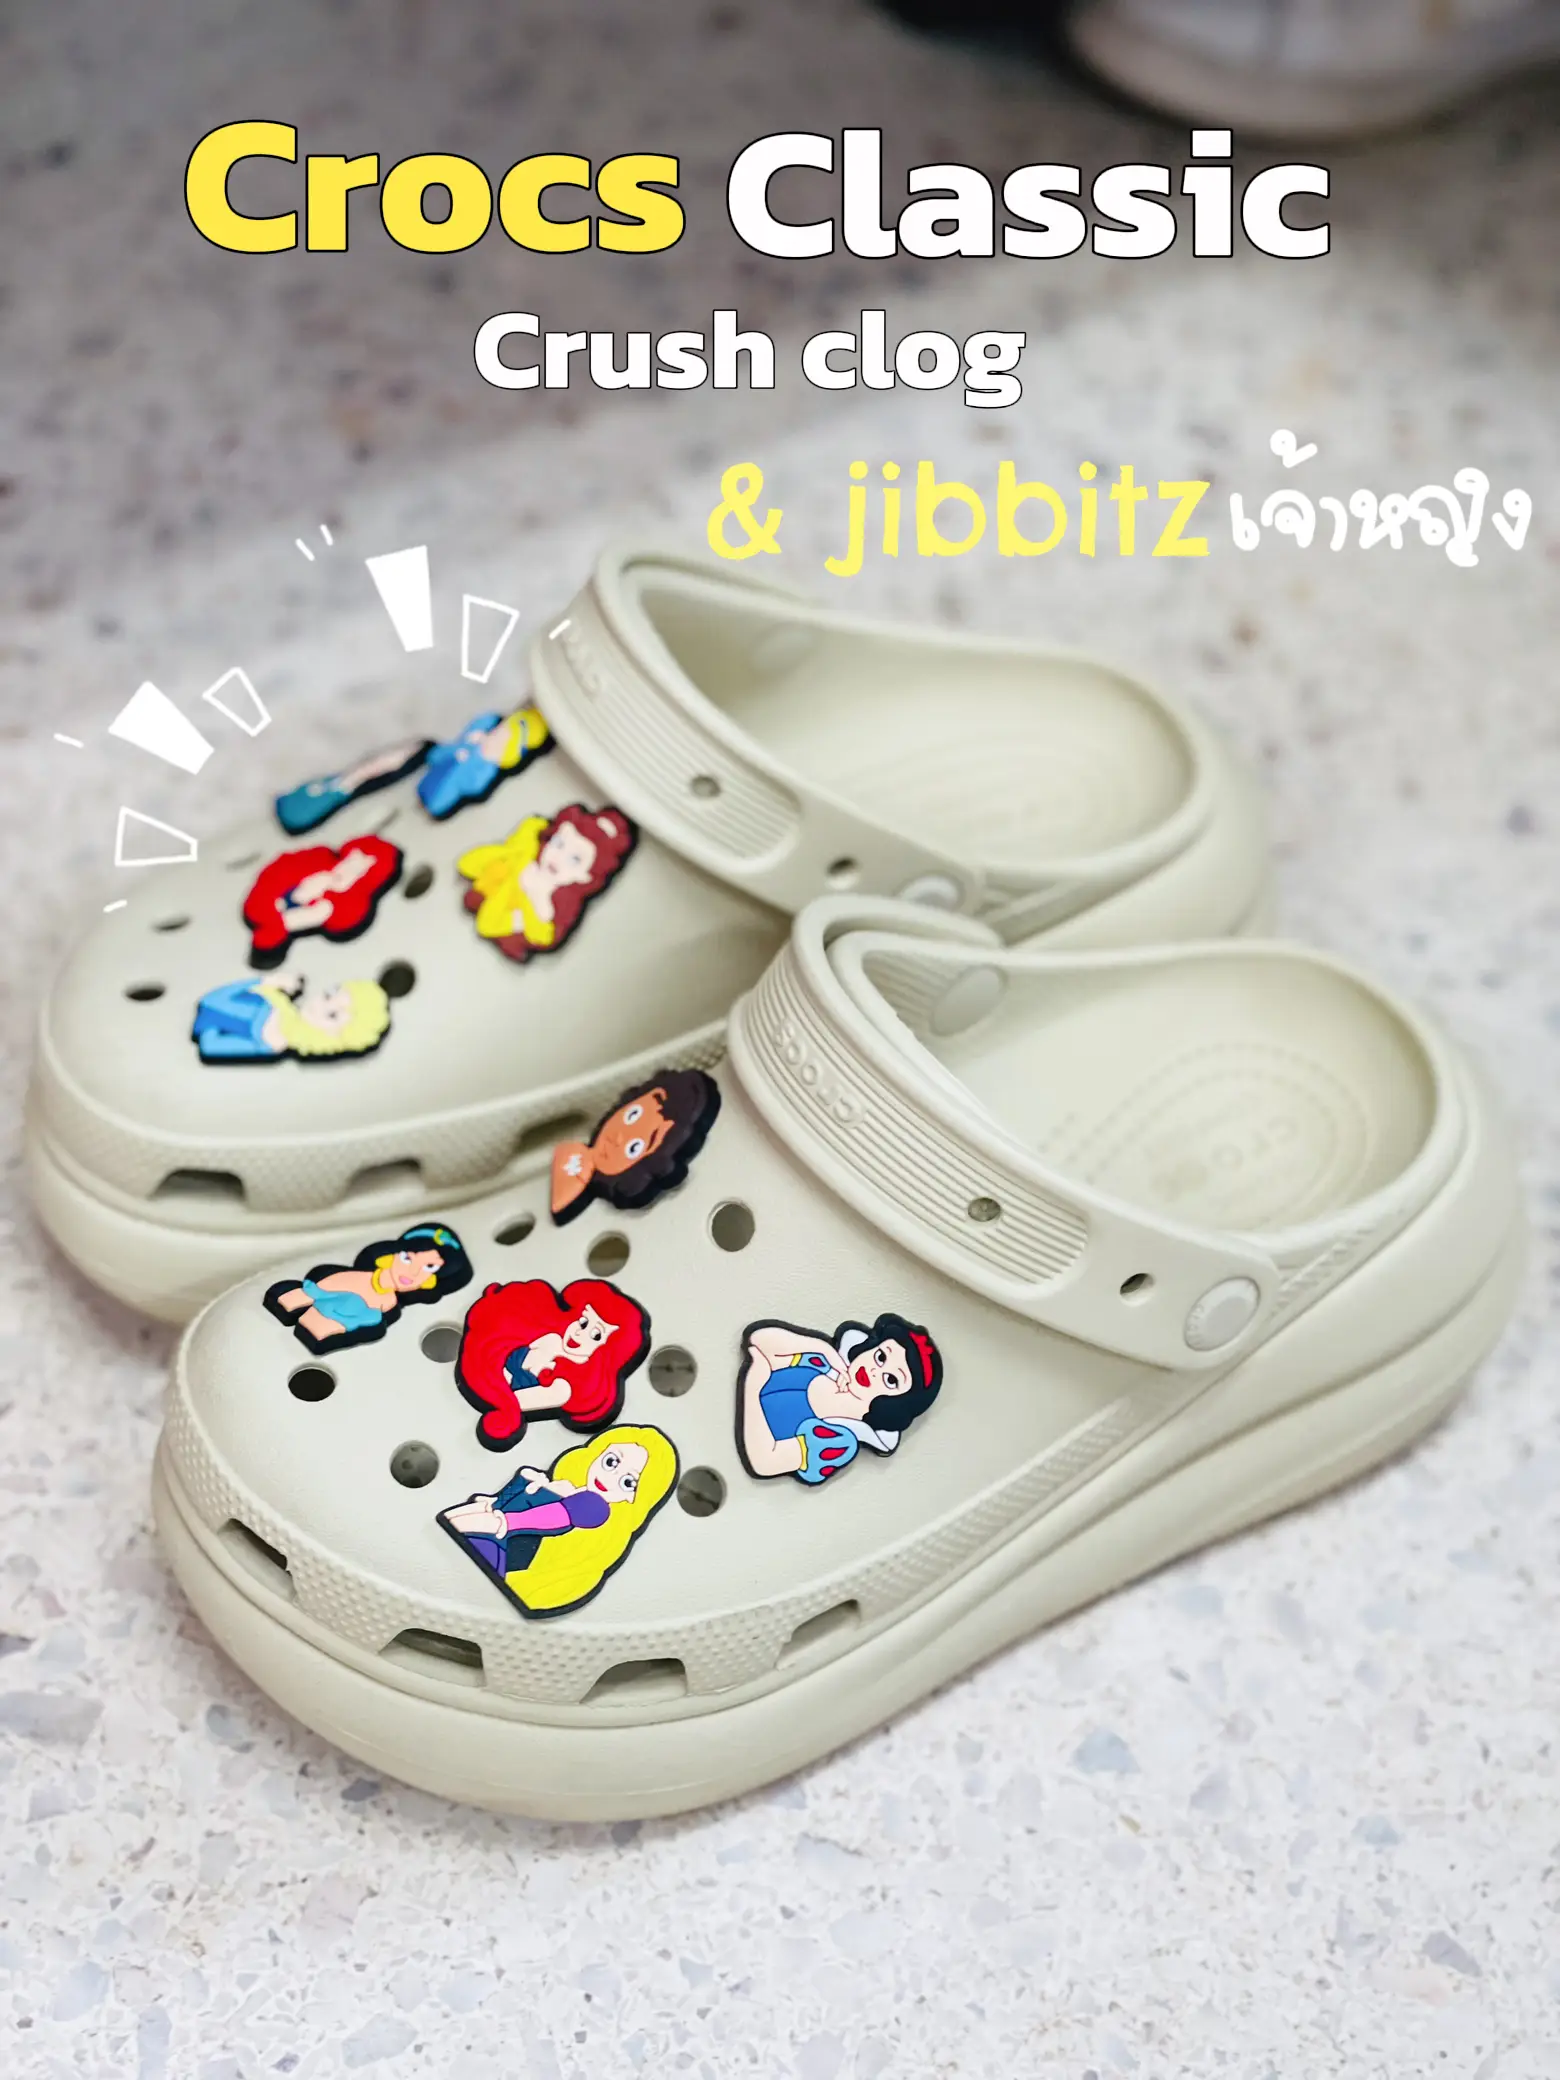 CROCS CLASSIC CRUSH FIRST IMPRESSIONS REVIEW  AND HOW I STYLED IT WITH  JIBBITZ! 